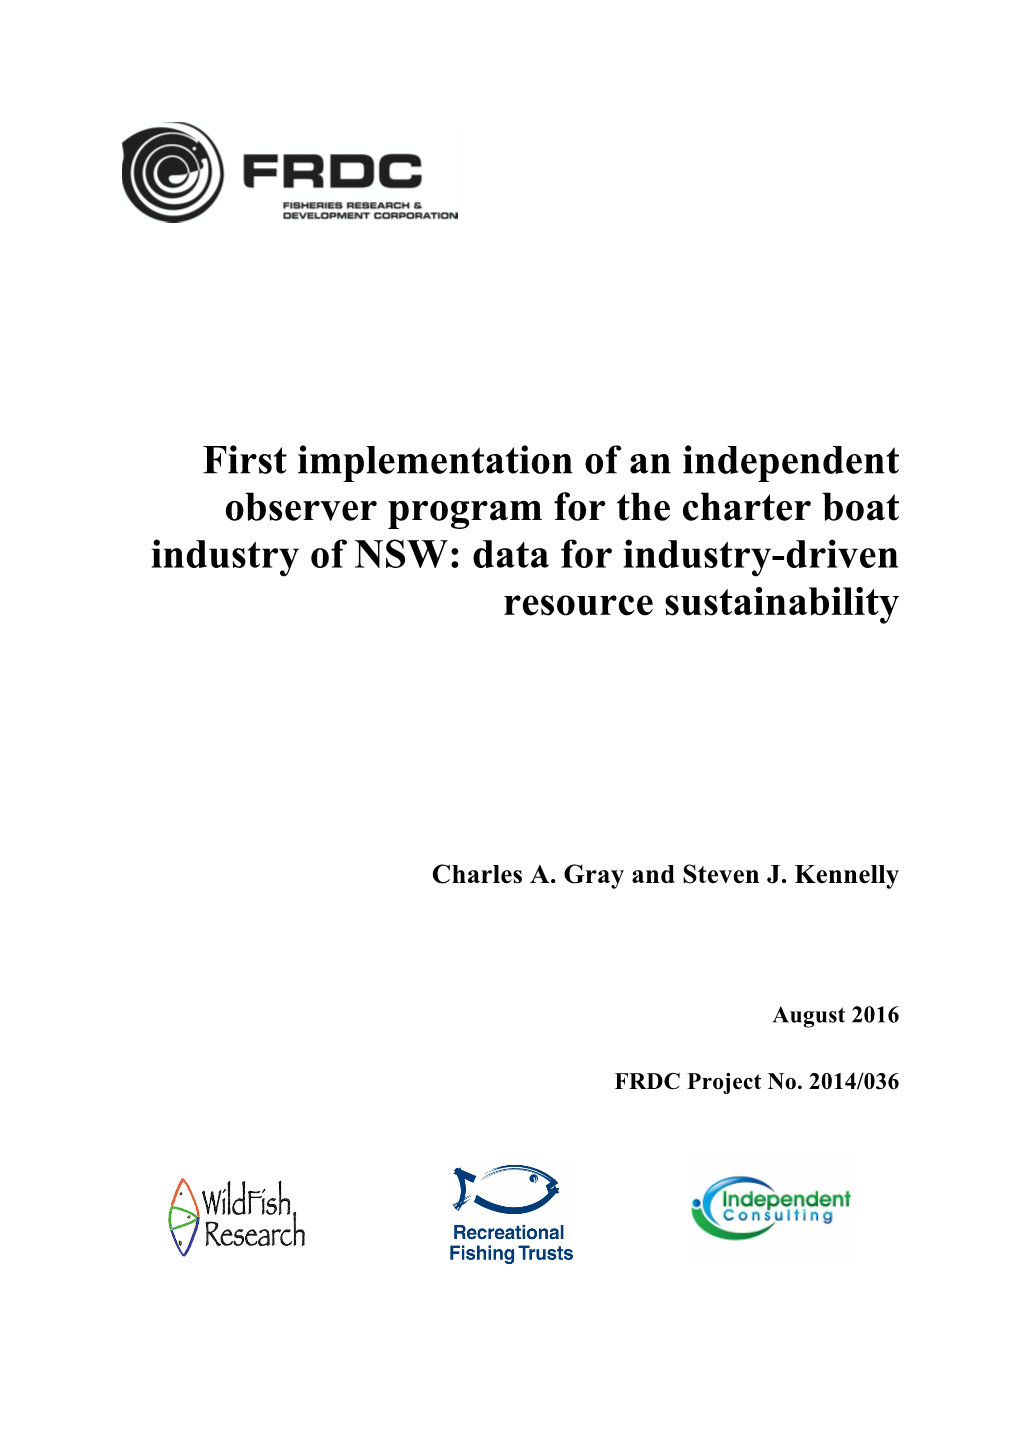 First Implementation of an Independent Observer Program for the Charter Boat Industry of NSW: Data for Industry-Driven Resource Sustainability